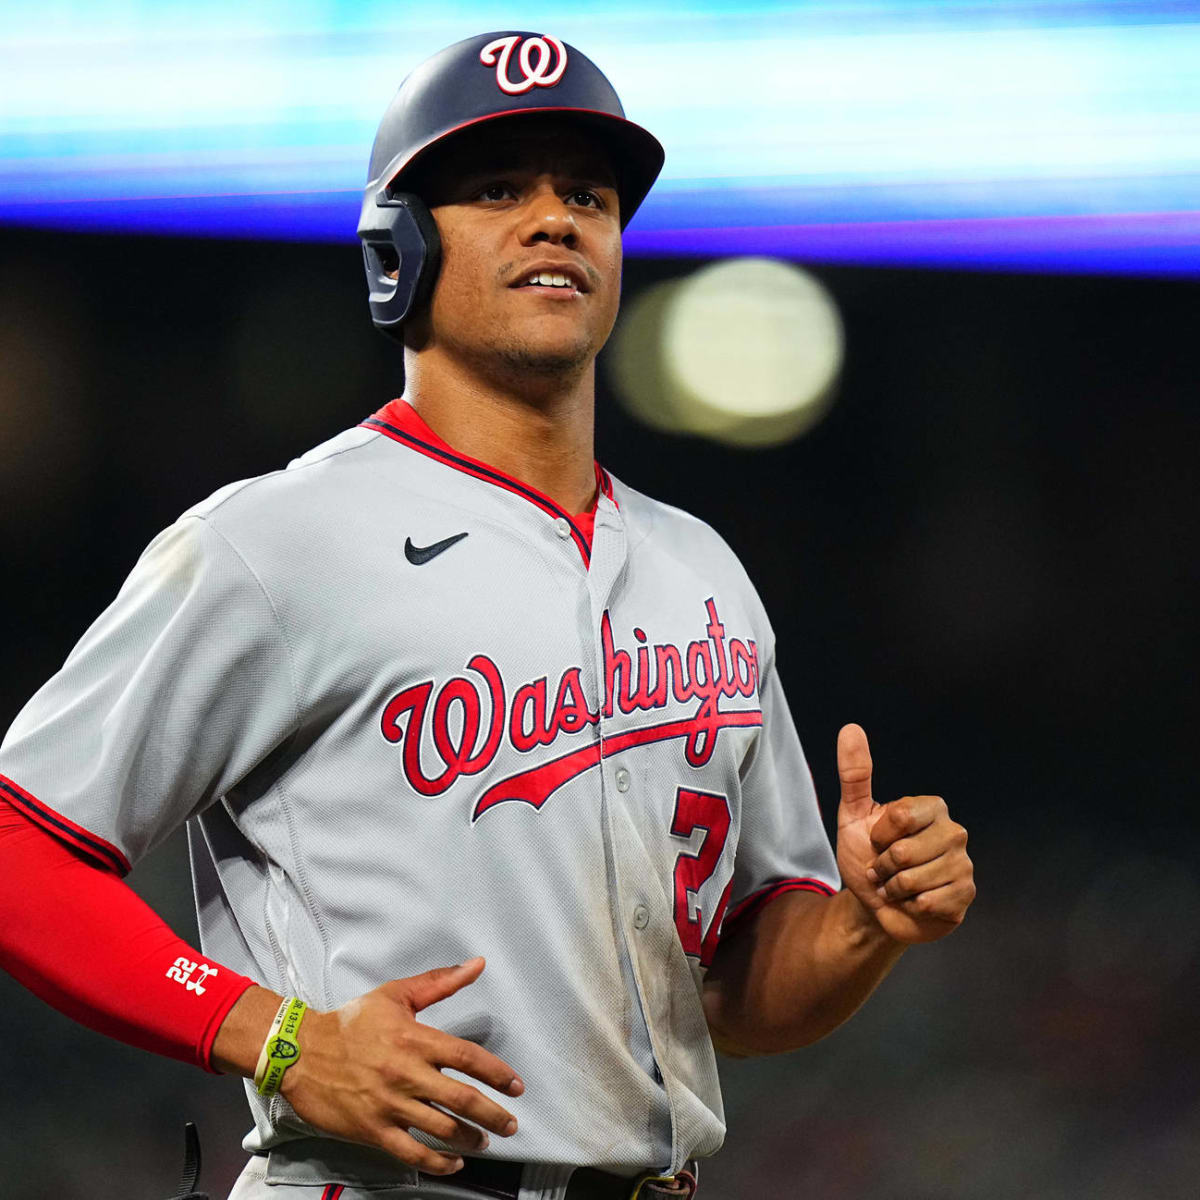 Dodgers: Juan Soto Spotted at Wild Card Game Supporting His Former